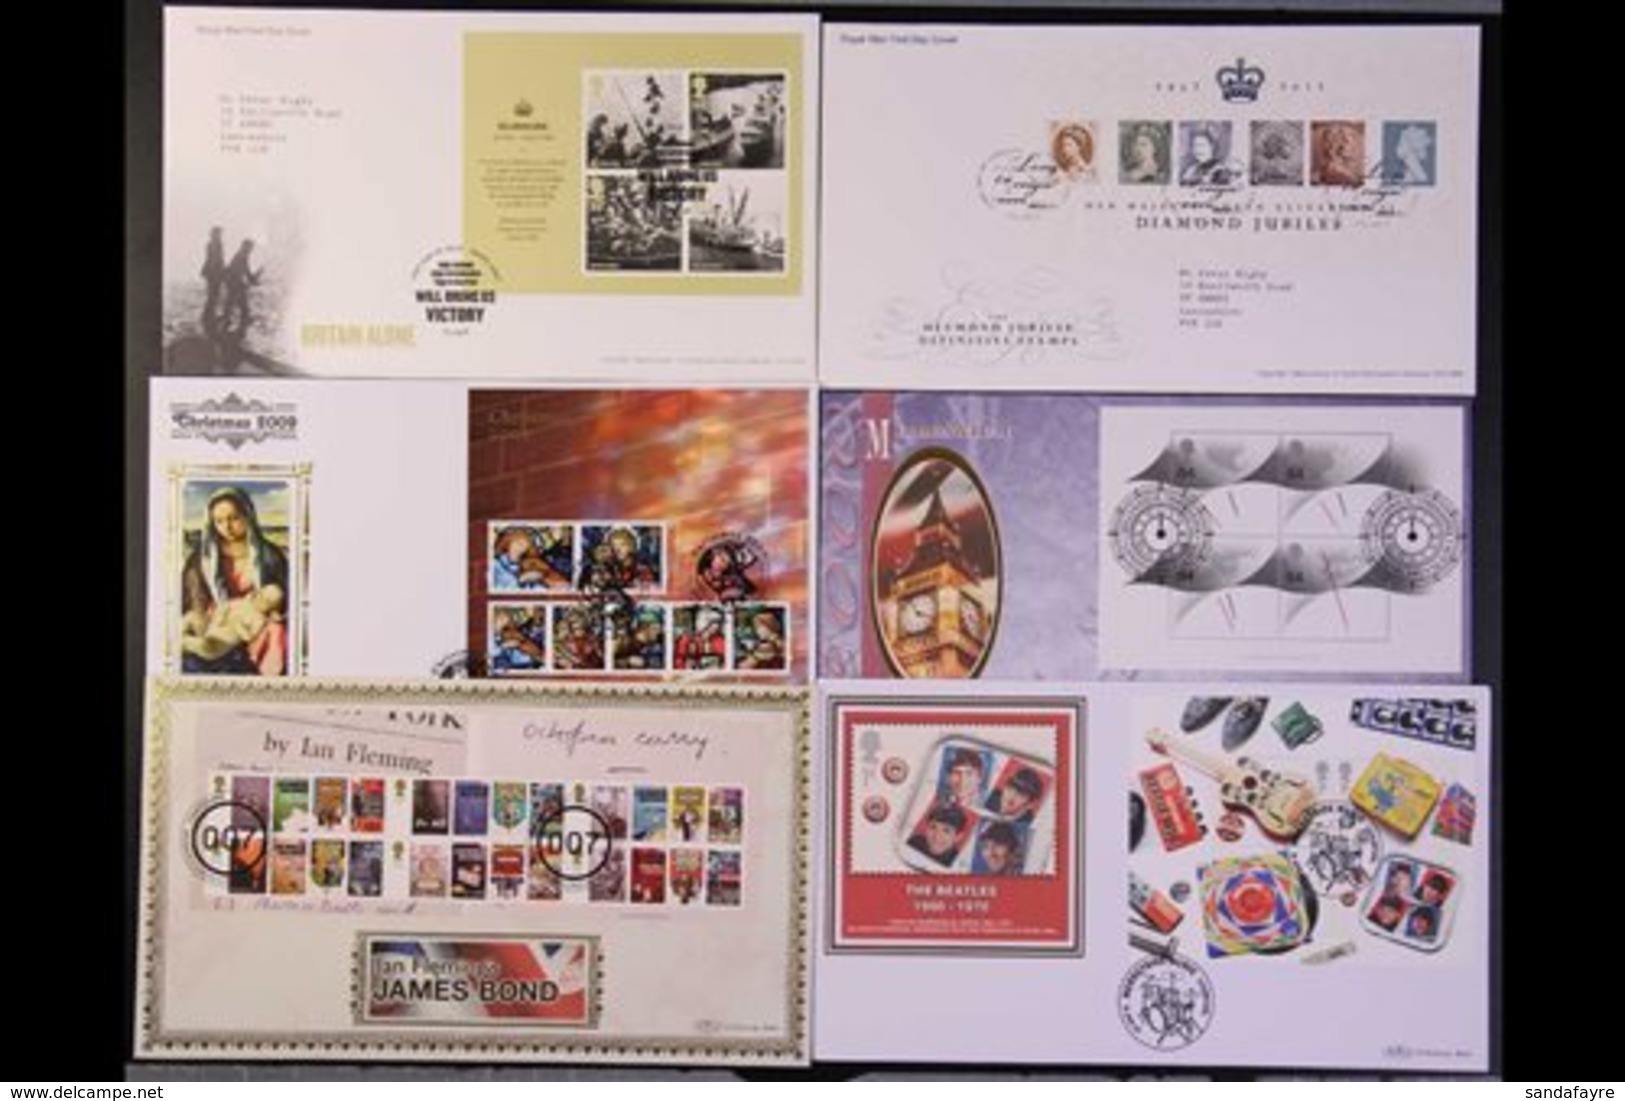 1978-2012 MINIATURE SHEET FDC'S  Very Fine All Different Collection Of Royal Mail And "Benham" Limited Edition Covers, W - FDC